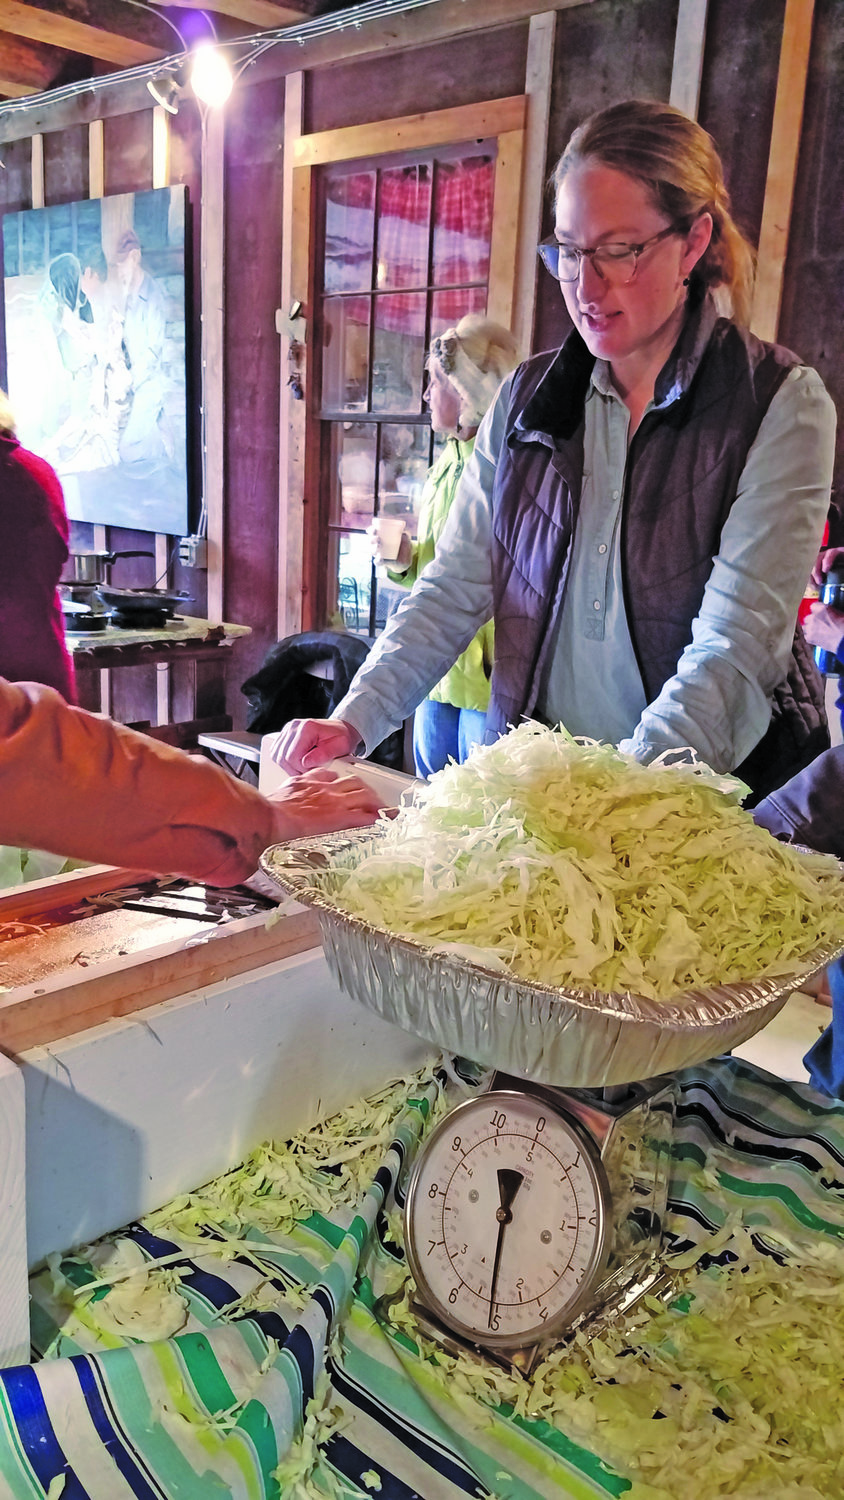 Amanda Penecale helps grate piles of cabbage to make into sauerkraut at the Plumsteadville Grange.